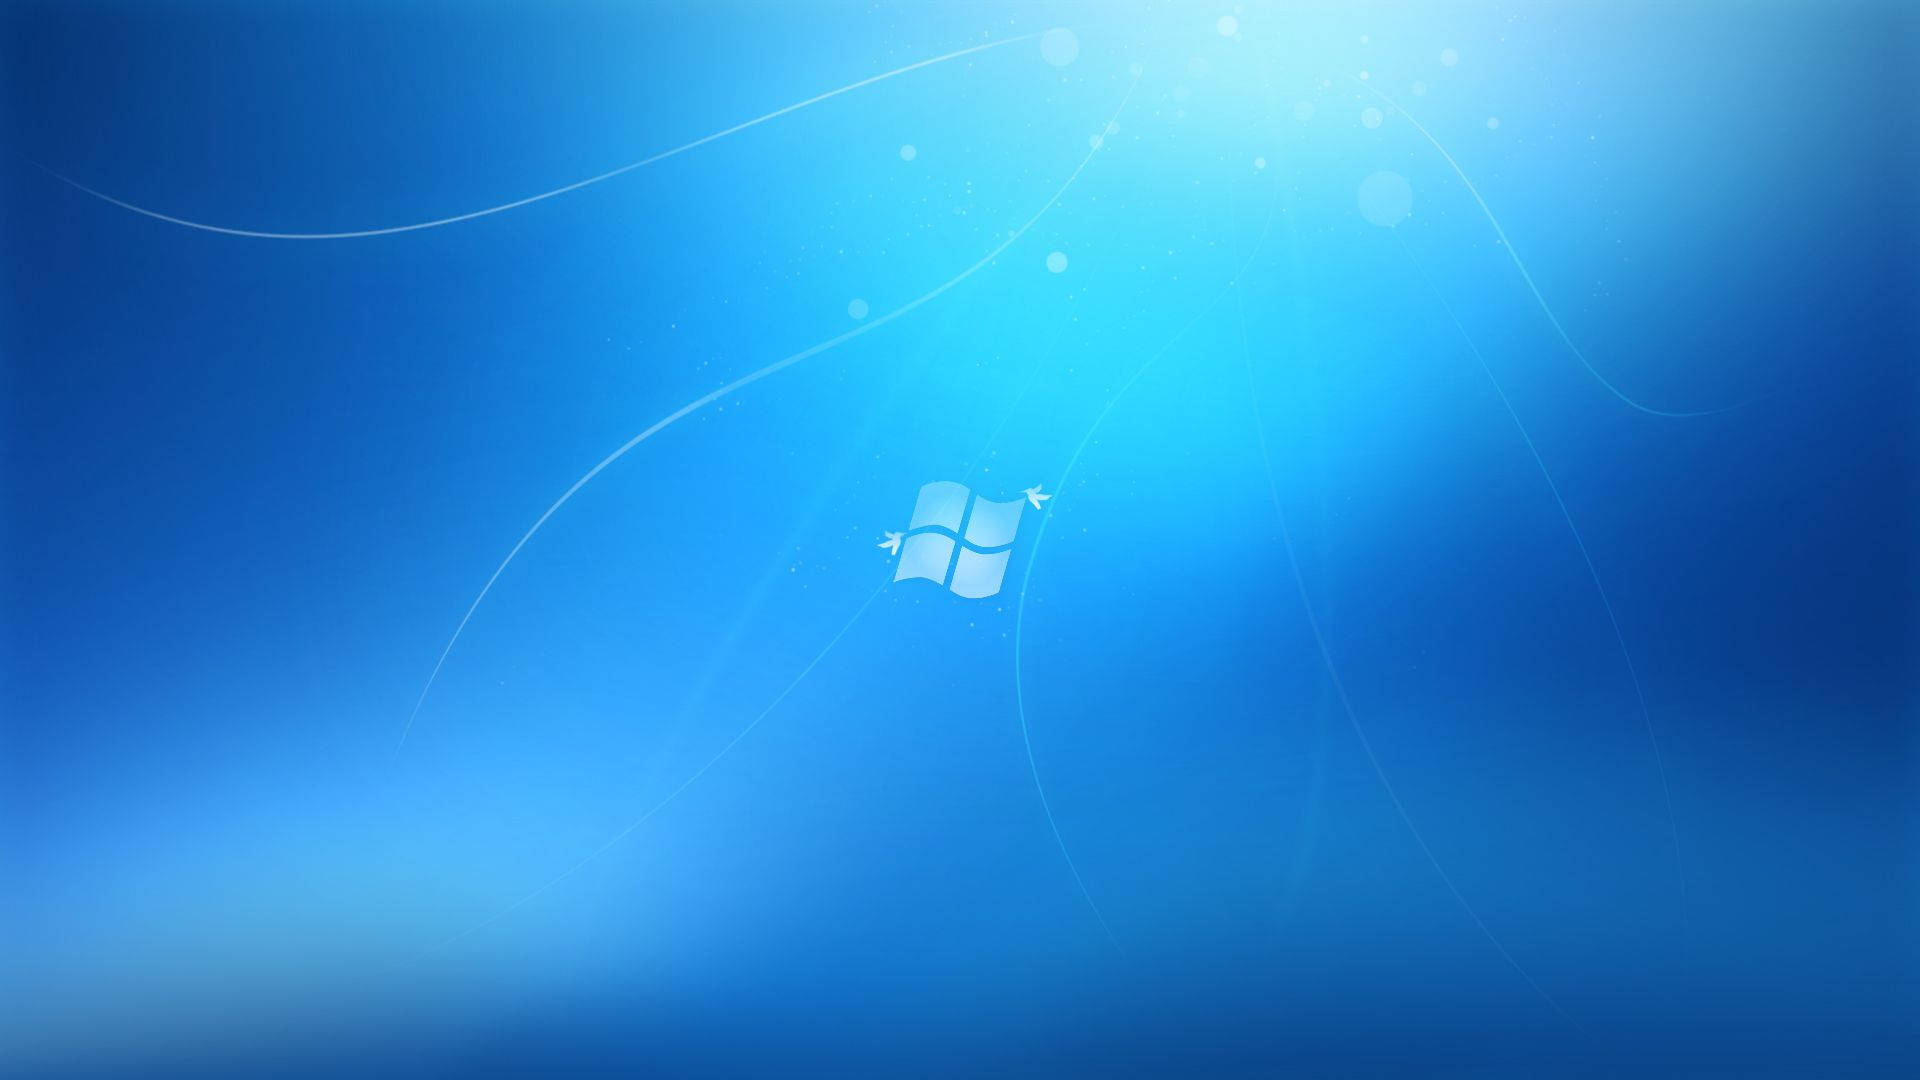 Windows 7 Wallpapers Hd Background